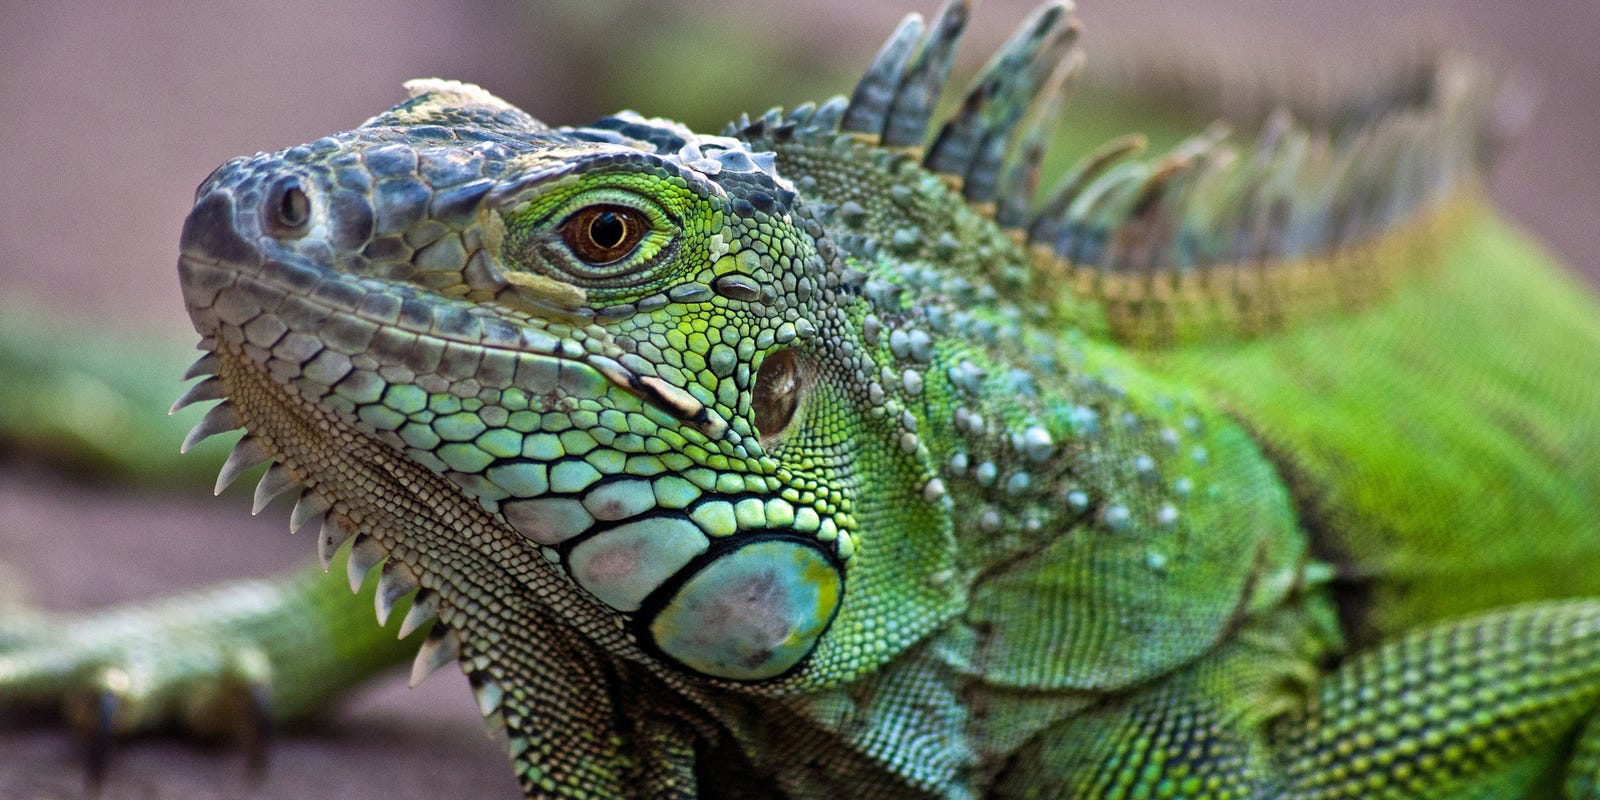 'Falling iguana' alert issued in Florida due to cold weather